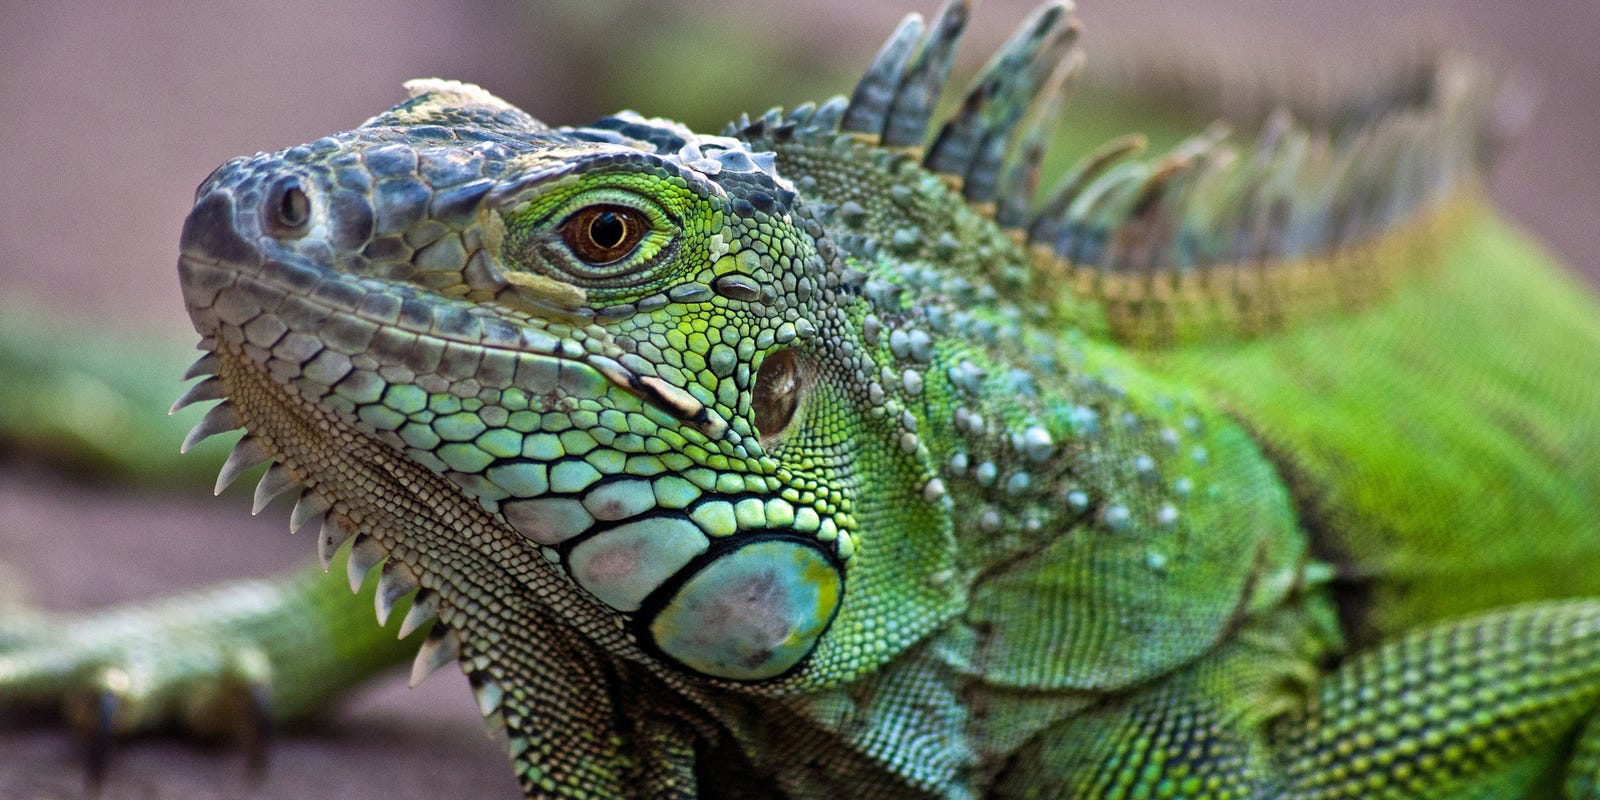 'Falling iguana' alert issued in Florida due to cold weather